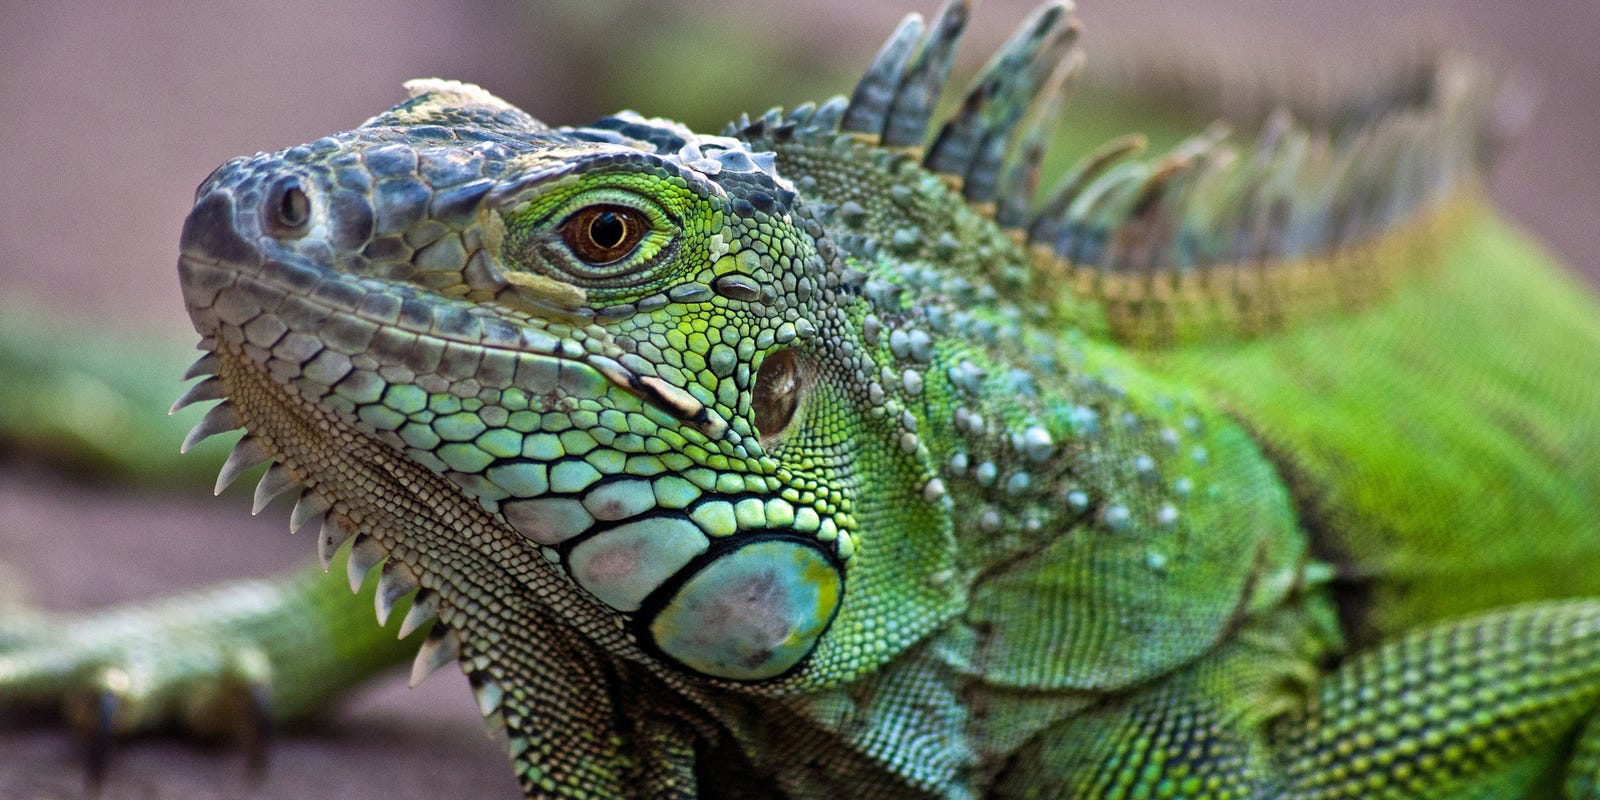 'Falling iguana' alert issued in Florida due to cold weather